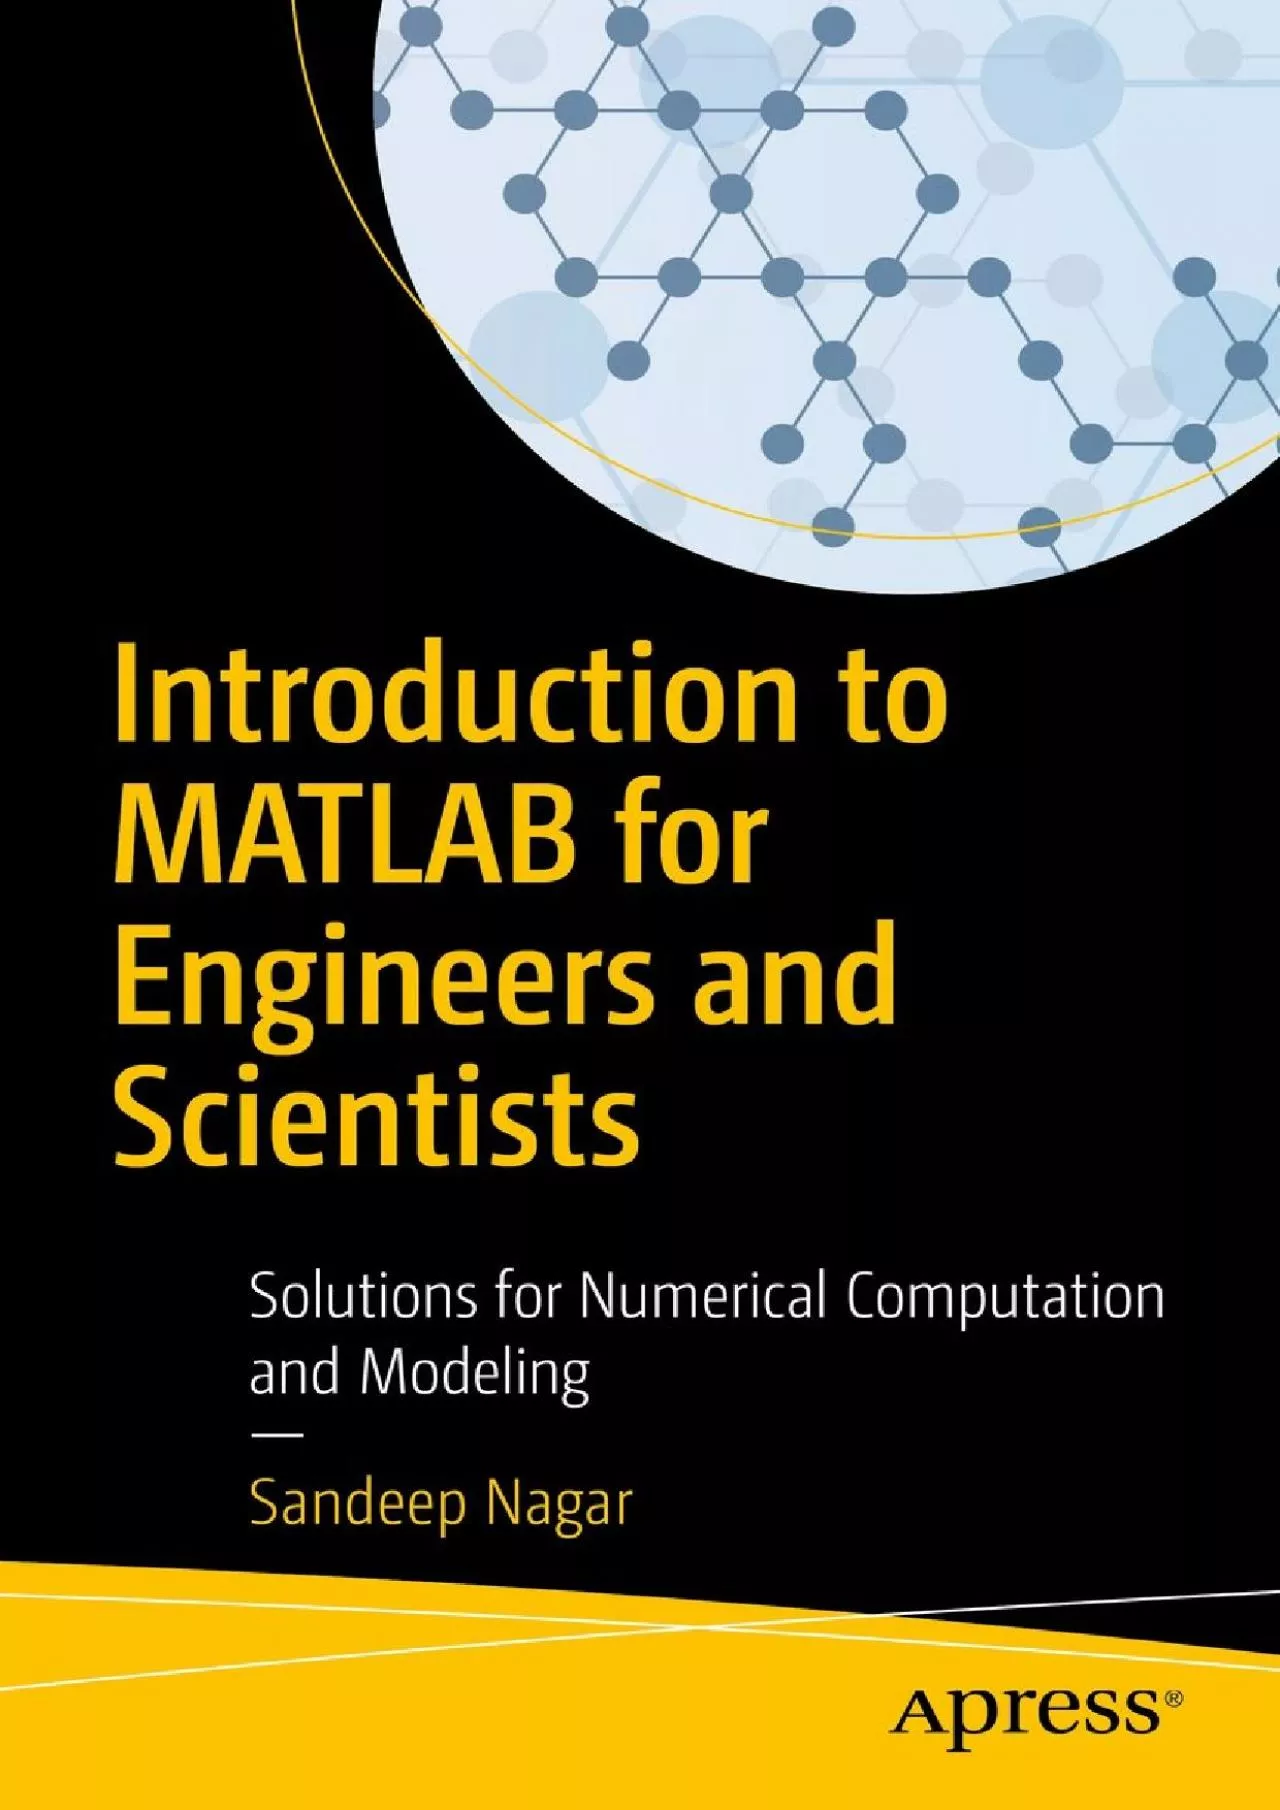 [FREE]-Introduction to MATLAB for Engineers and Scientists: Solutions for Numerical Computation